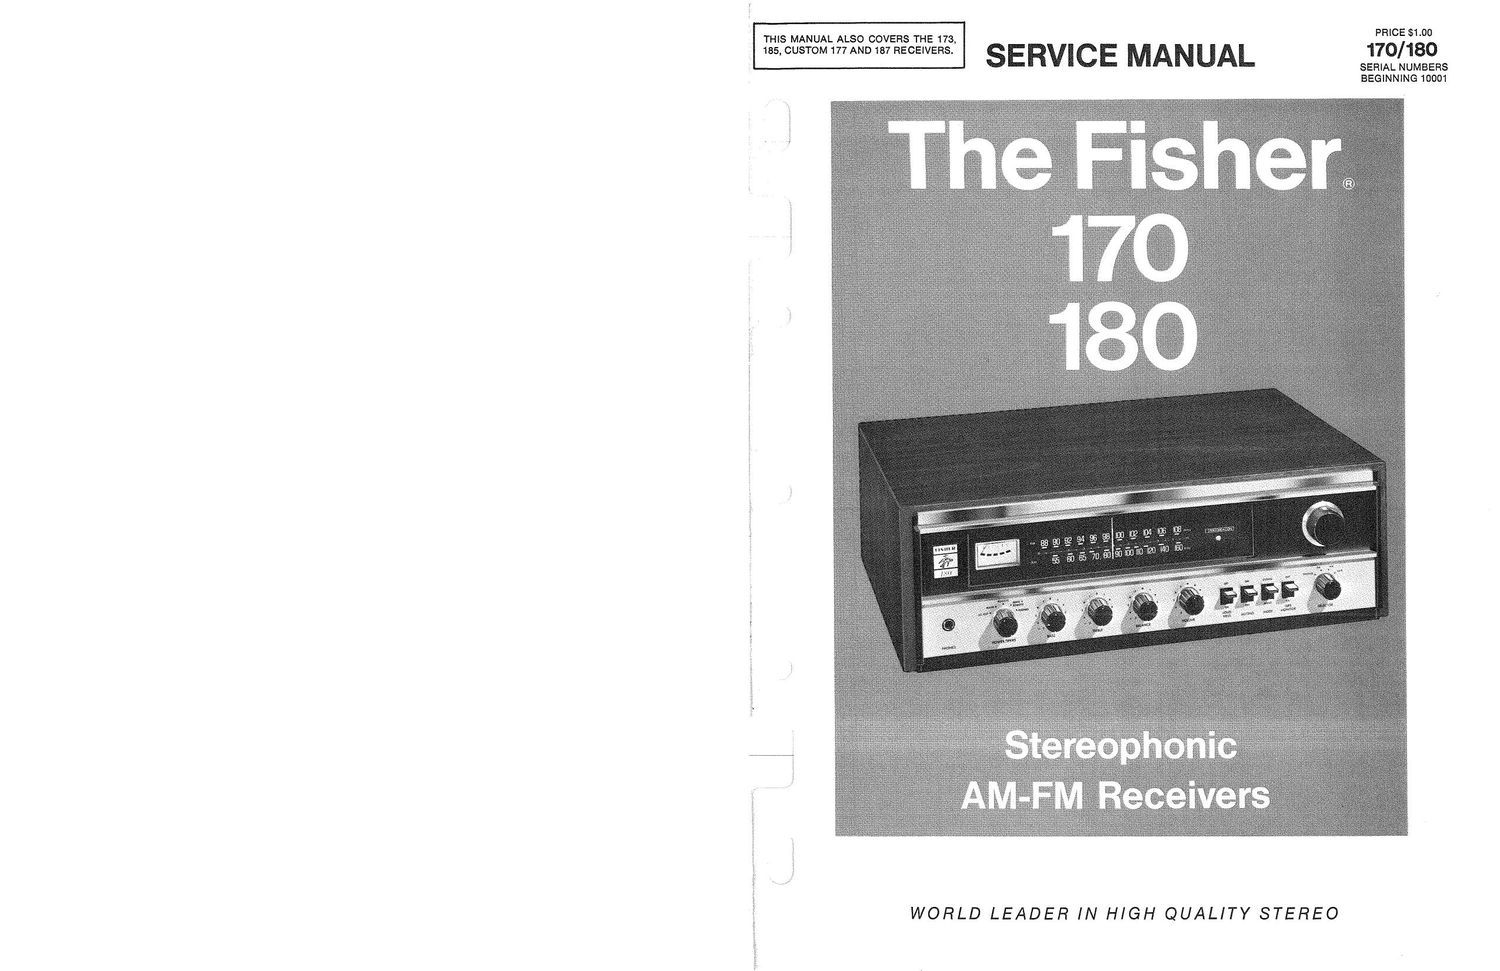 Fisher 180 Service Manual